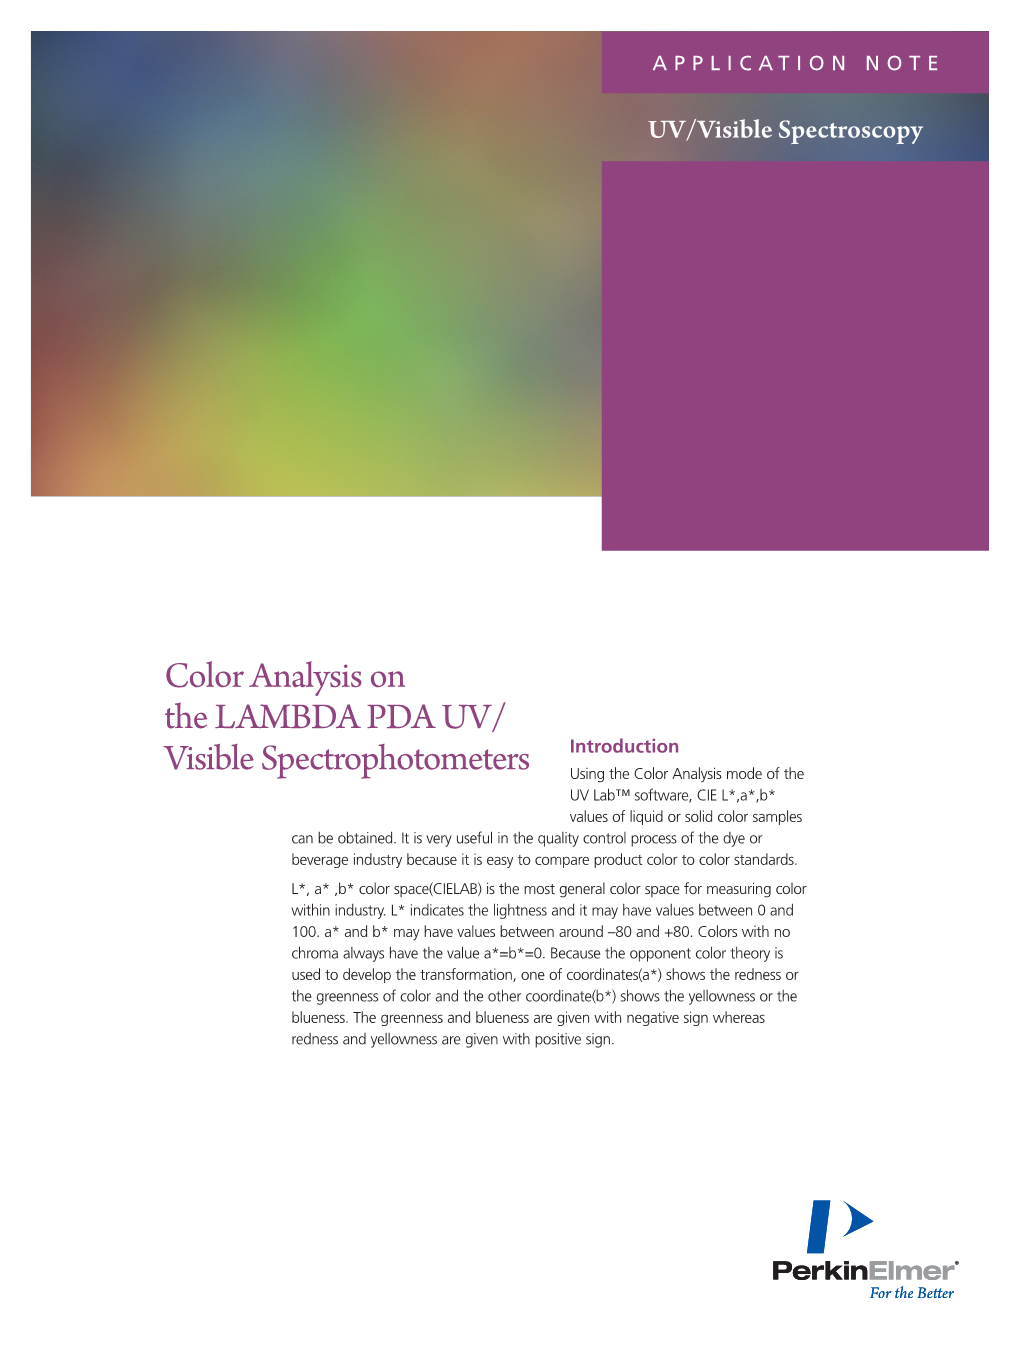 Color Analysis on the LAMBDA PDA UV/Visible Spectrophotometers